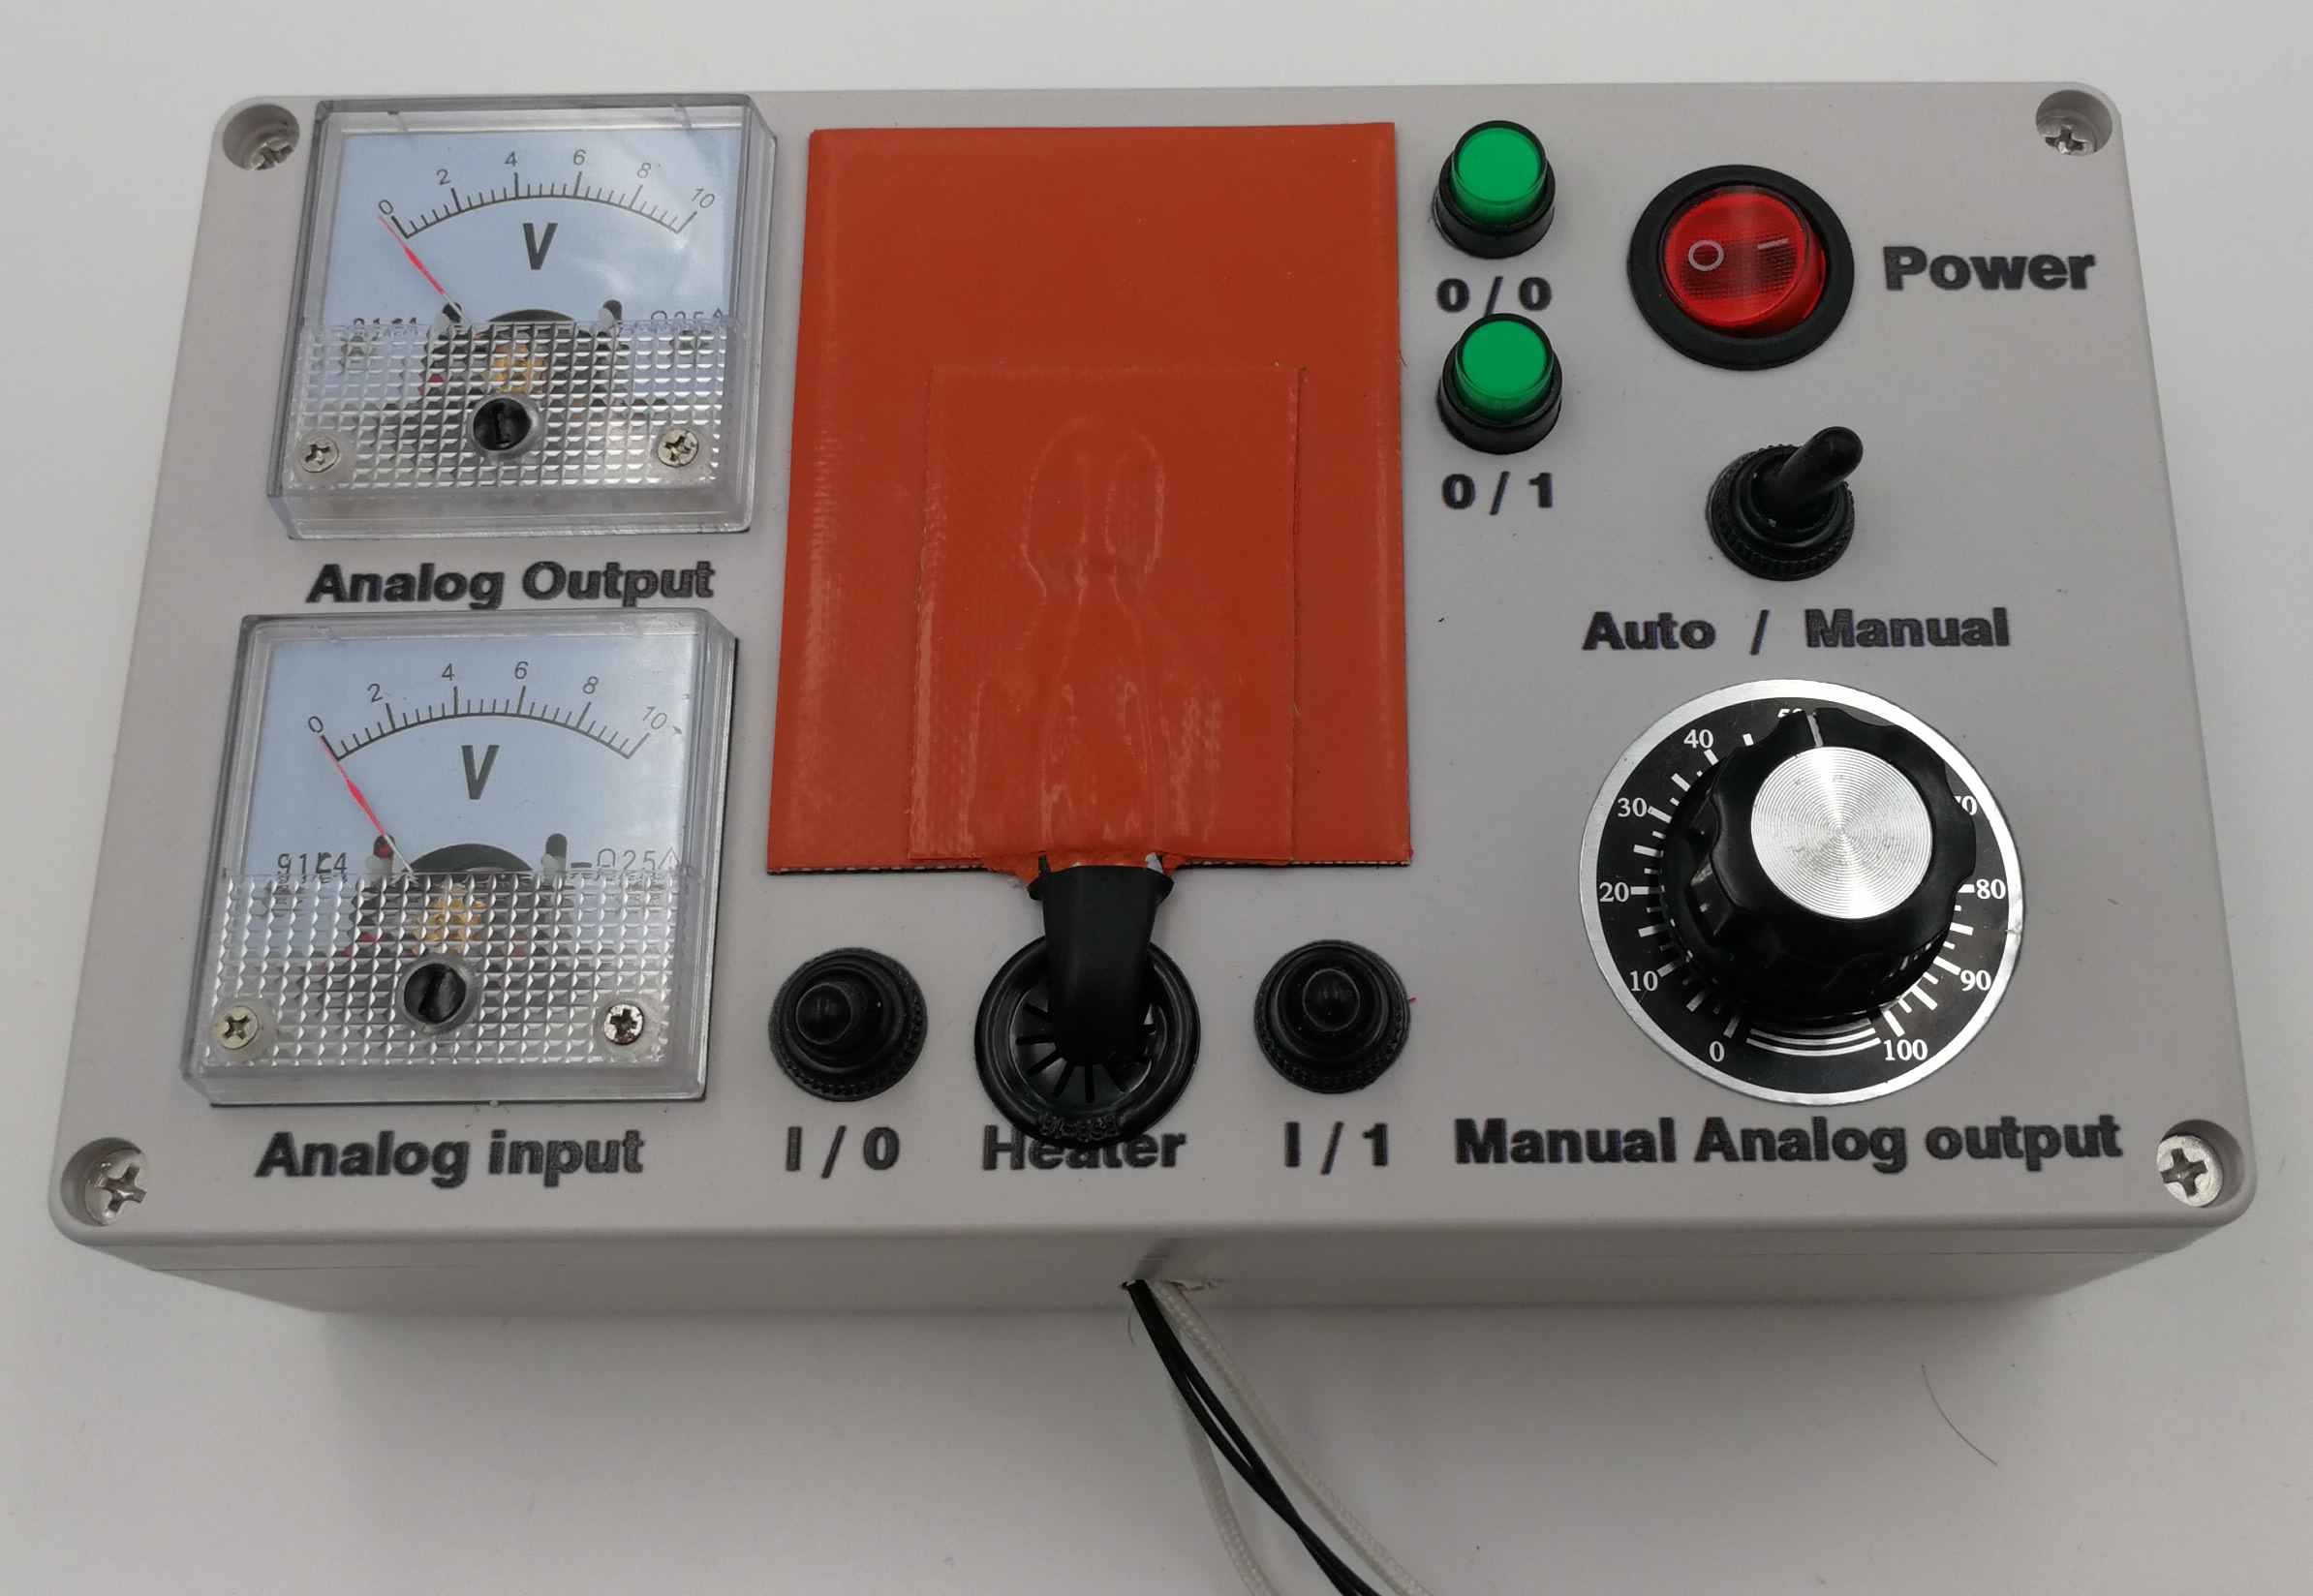 Build your Own Deluxe 2 Analog Trainer PLC Training 8 inputs 8 outputs